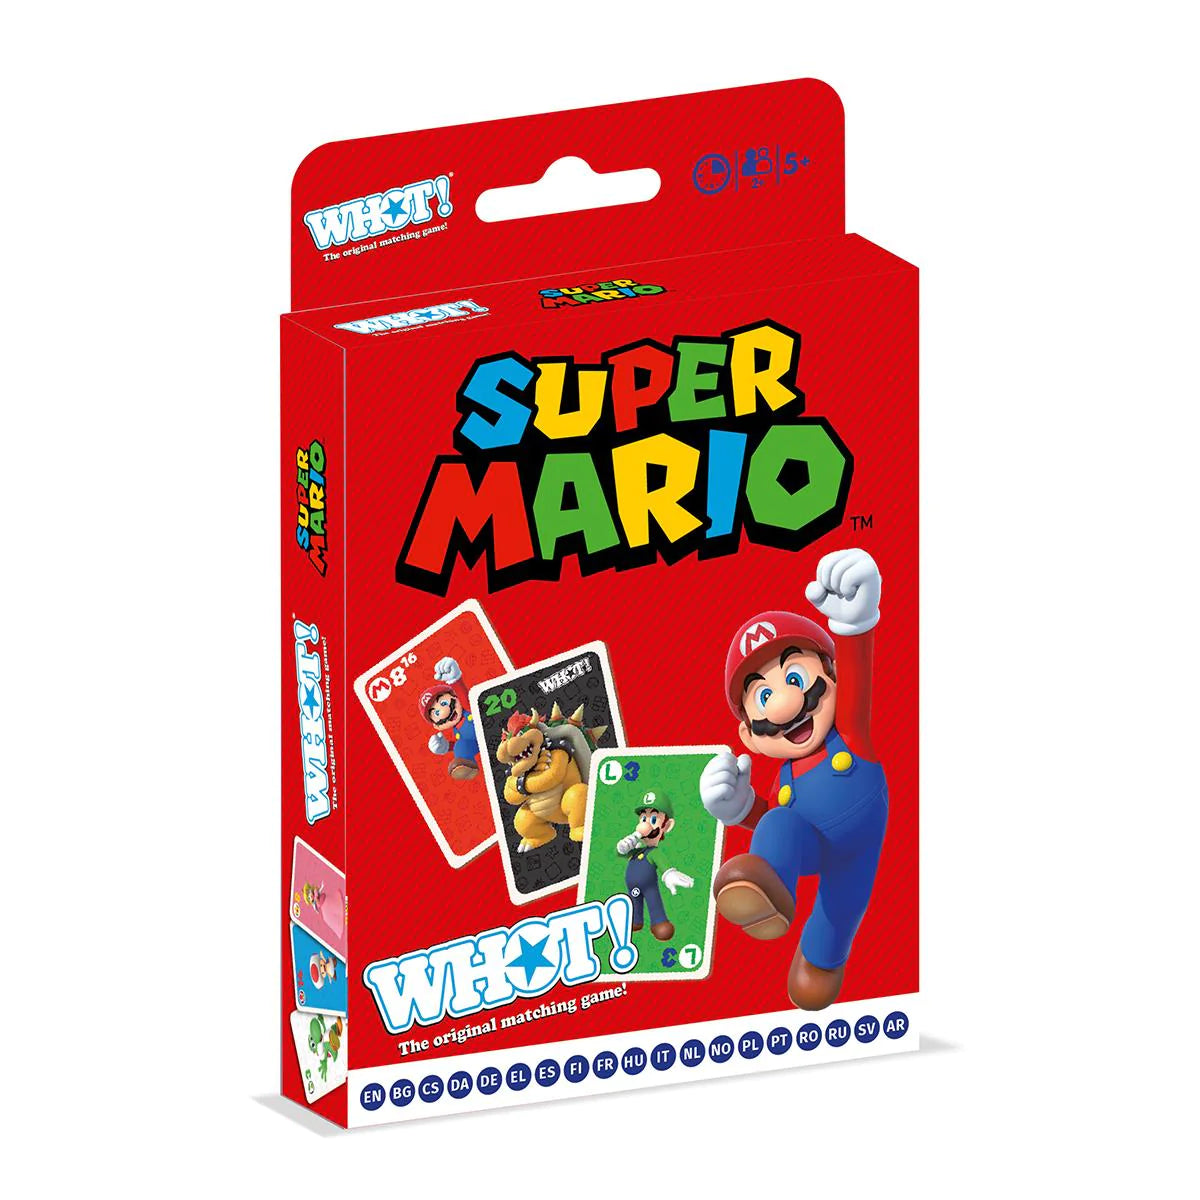 WHOT! - Super Mario WHOT! - Loaded Dice